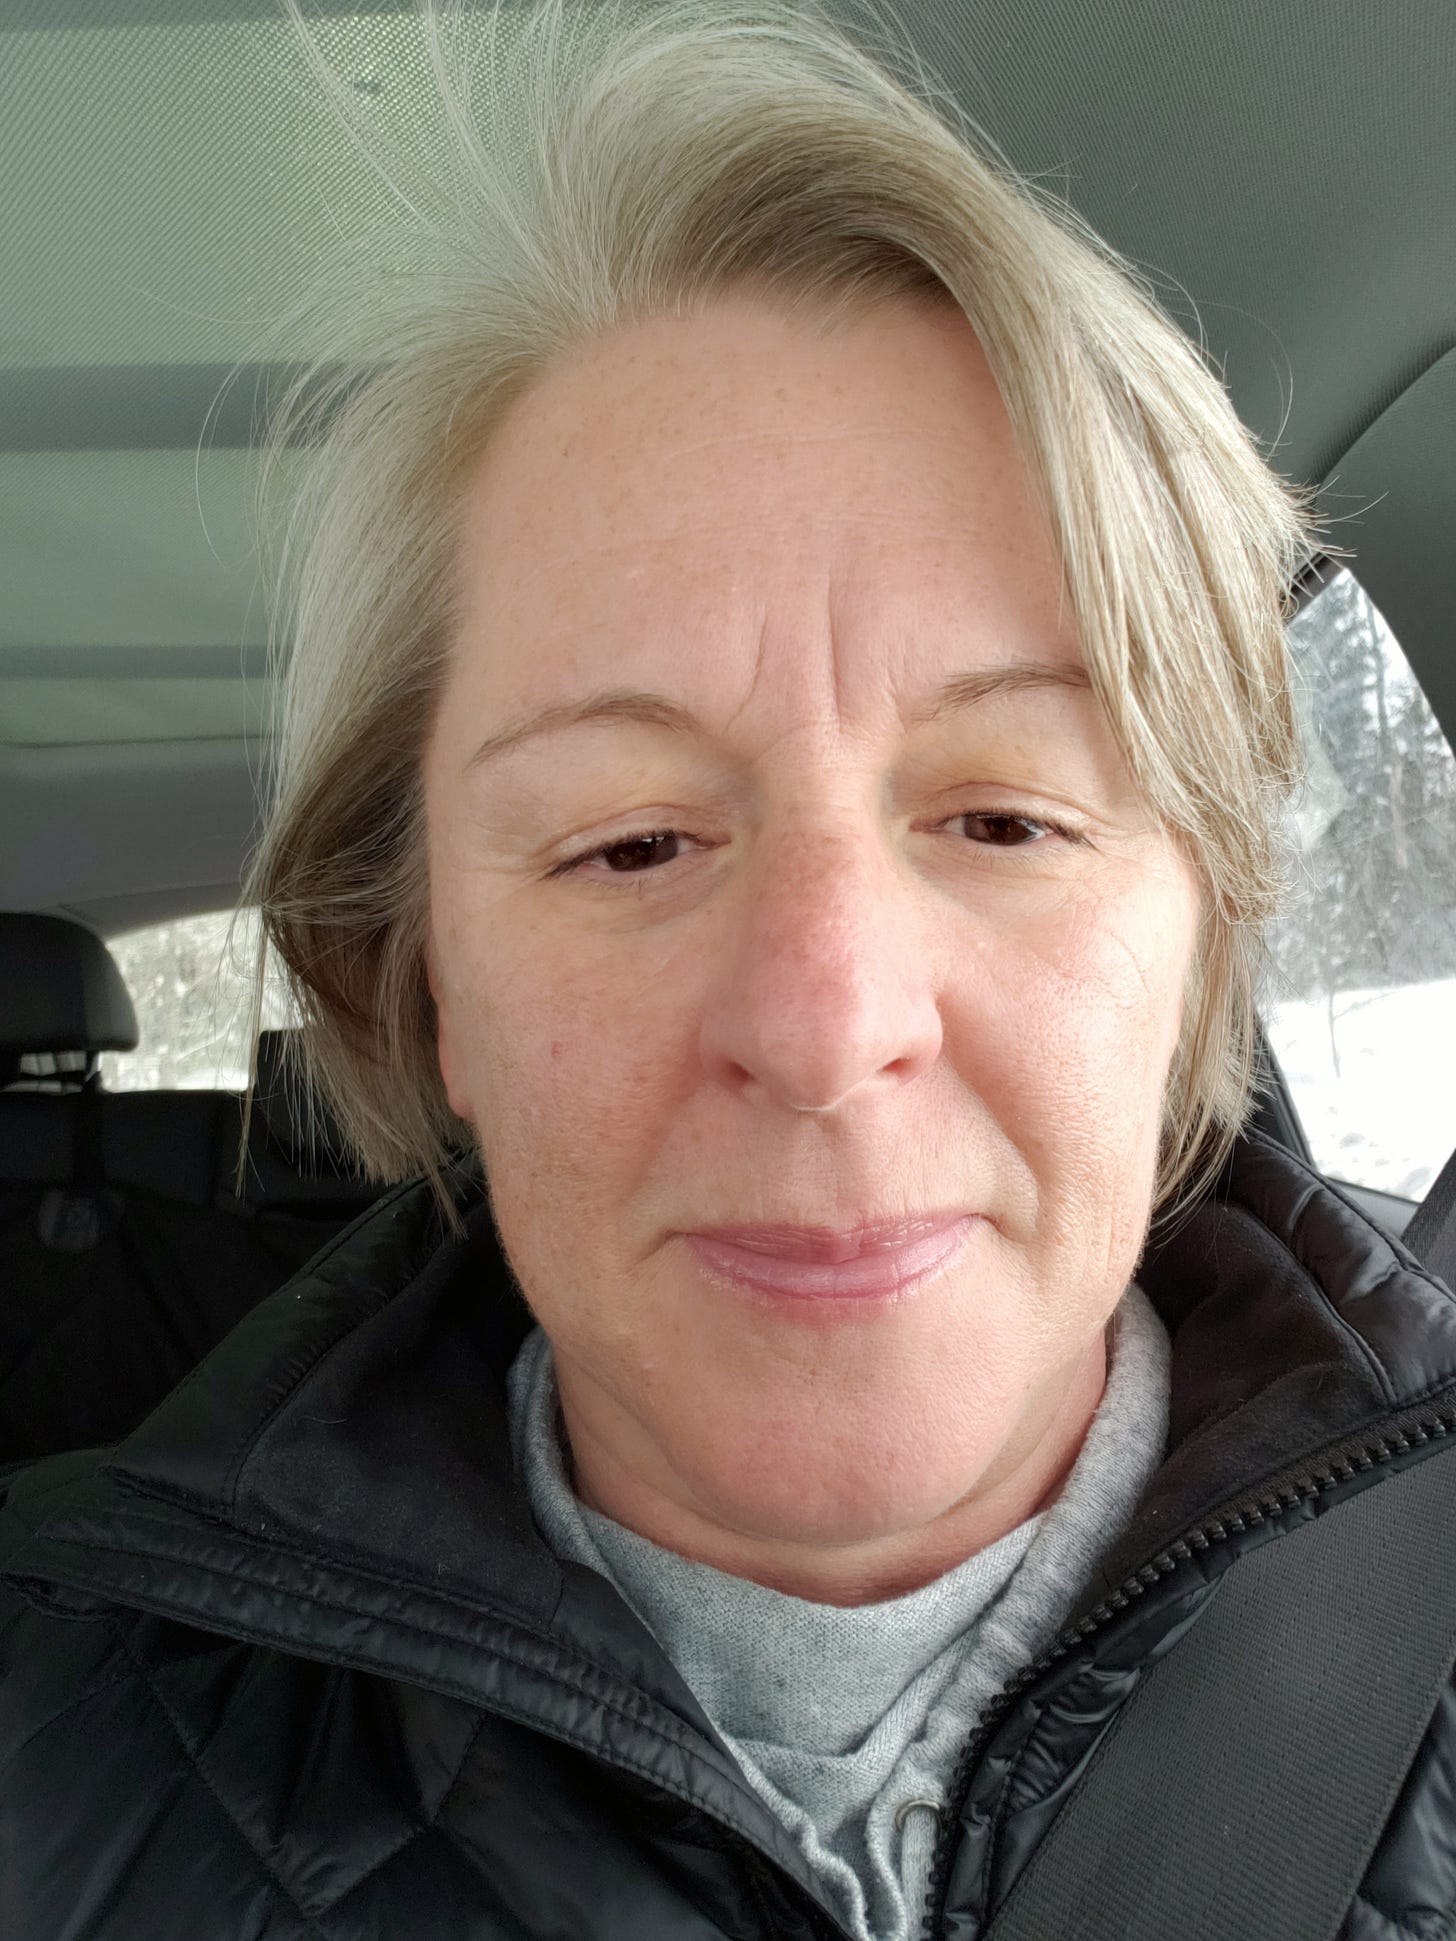 A middle-aged woman with short grey hair wears no makeup and has deep wrinkles between her eyes